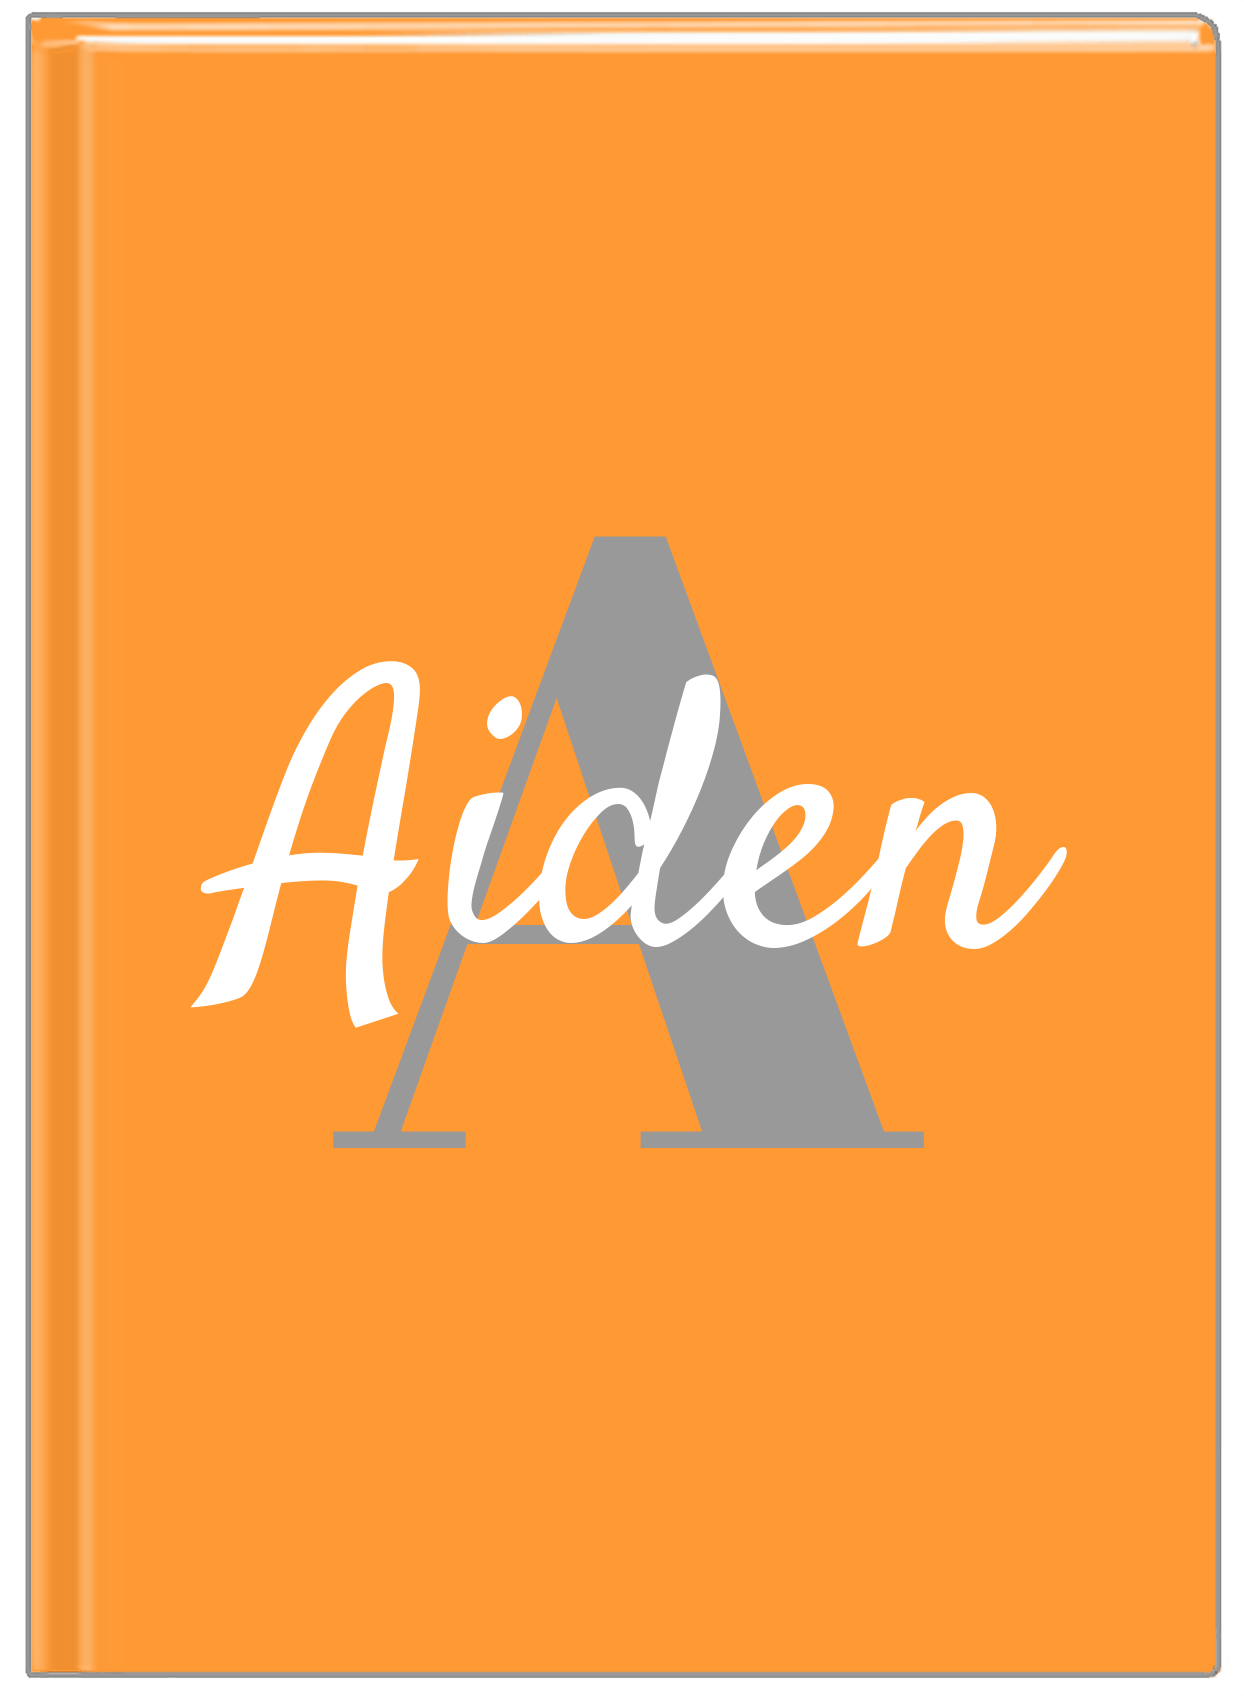 Personalized Solid Color Journal - Orange Background - Name Over Initial - Front View